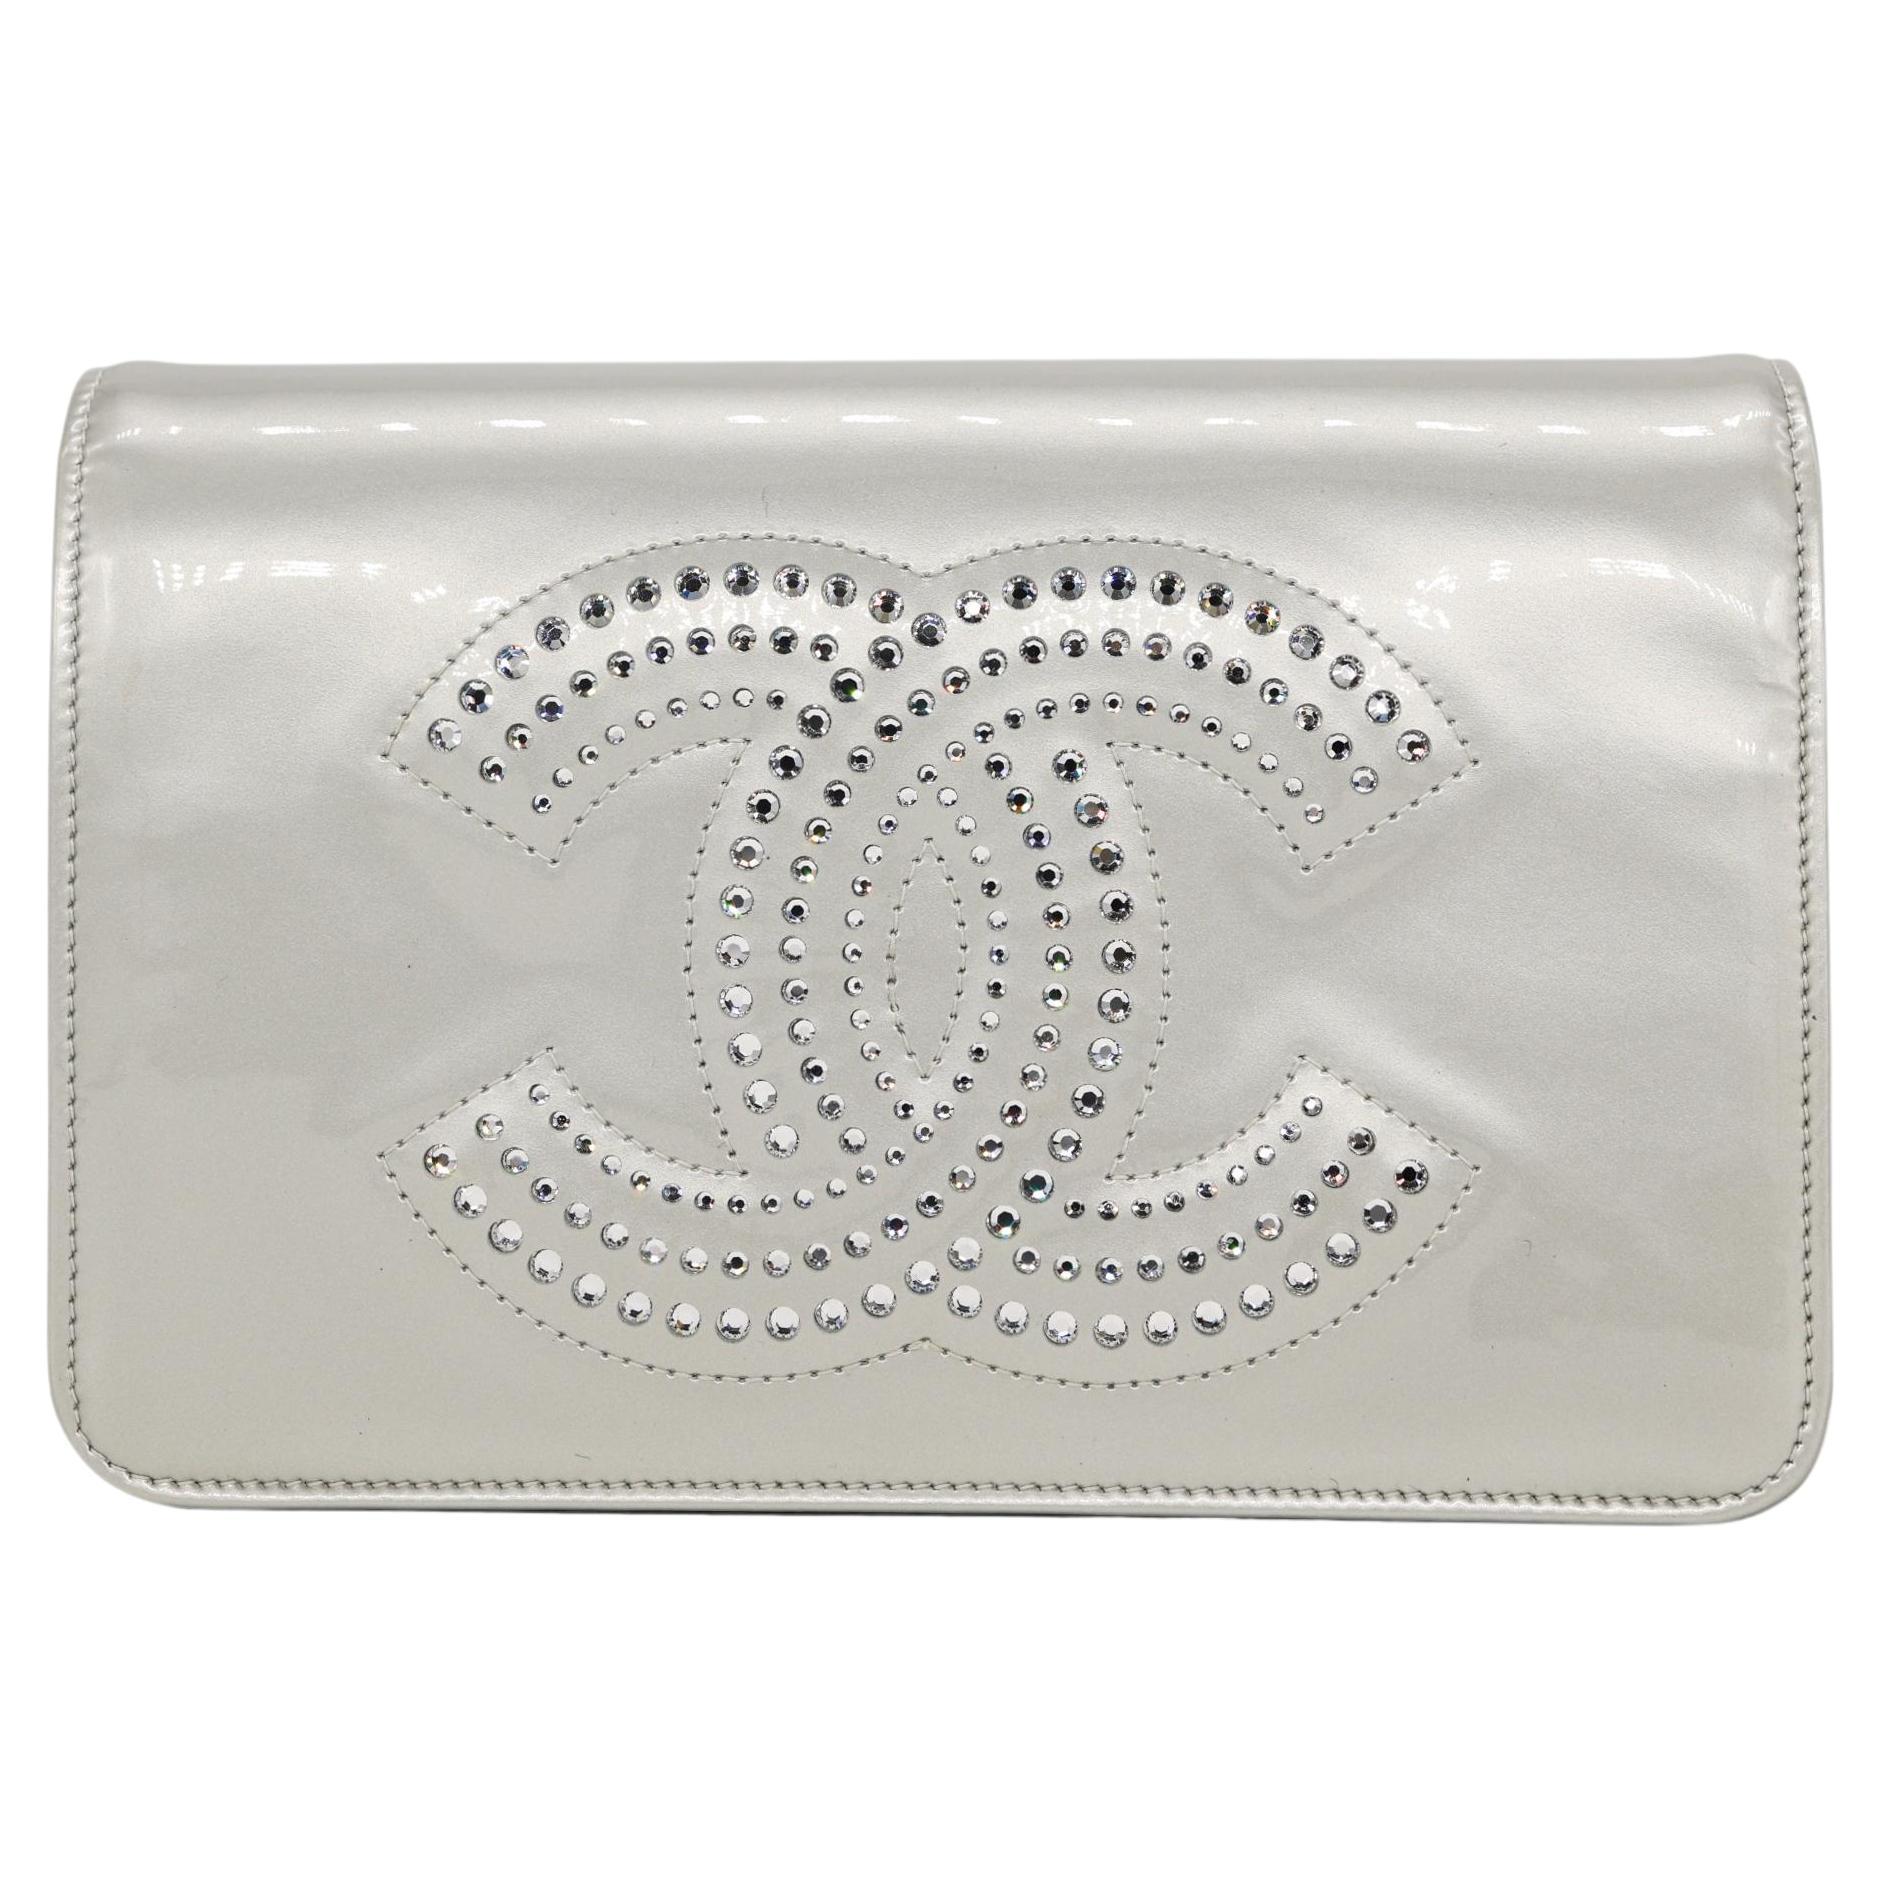 Chanel Silver Patent Leather Strass Wallet on Chain Clutch Crossbody Bag,  2009. at 1stDibs